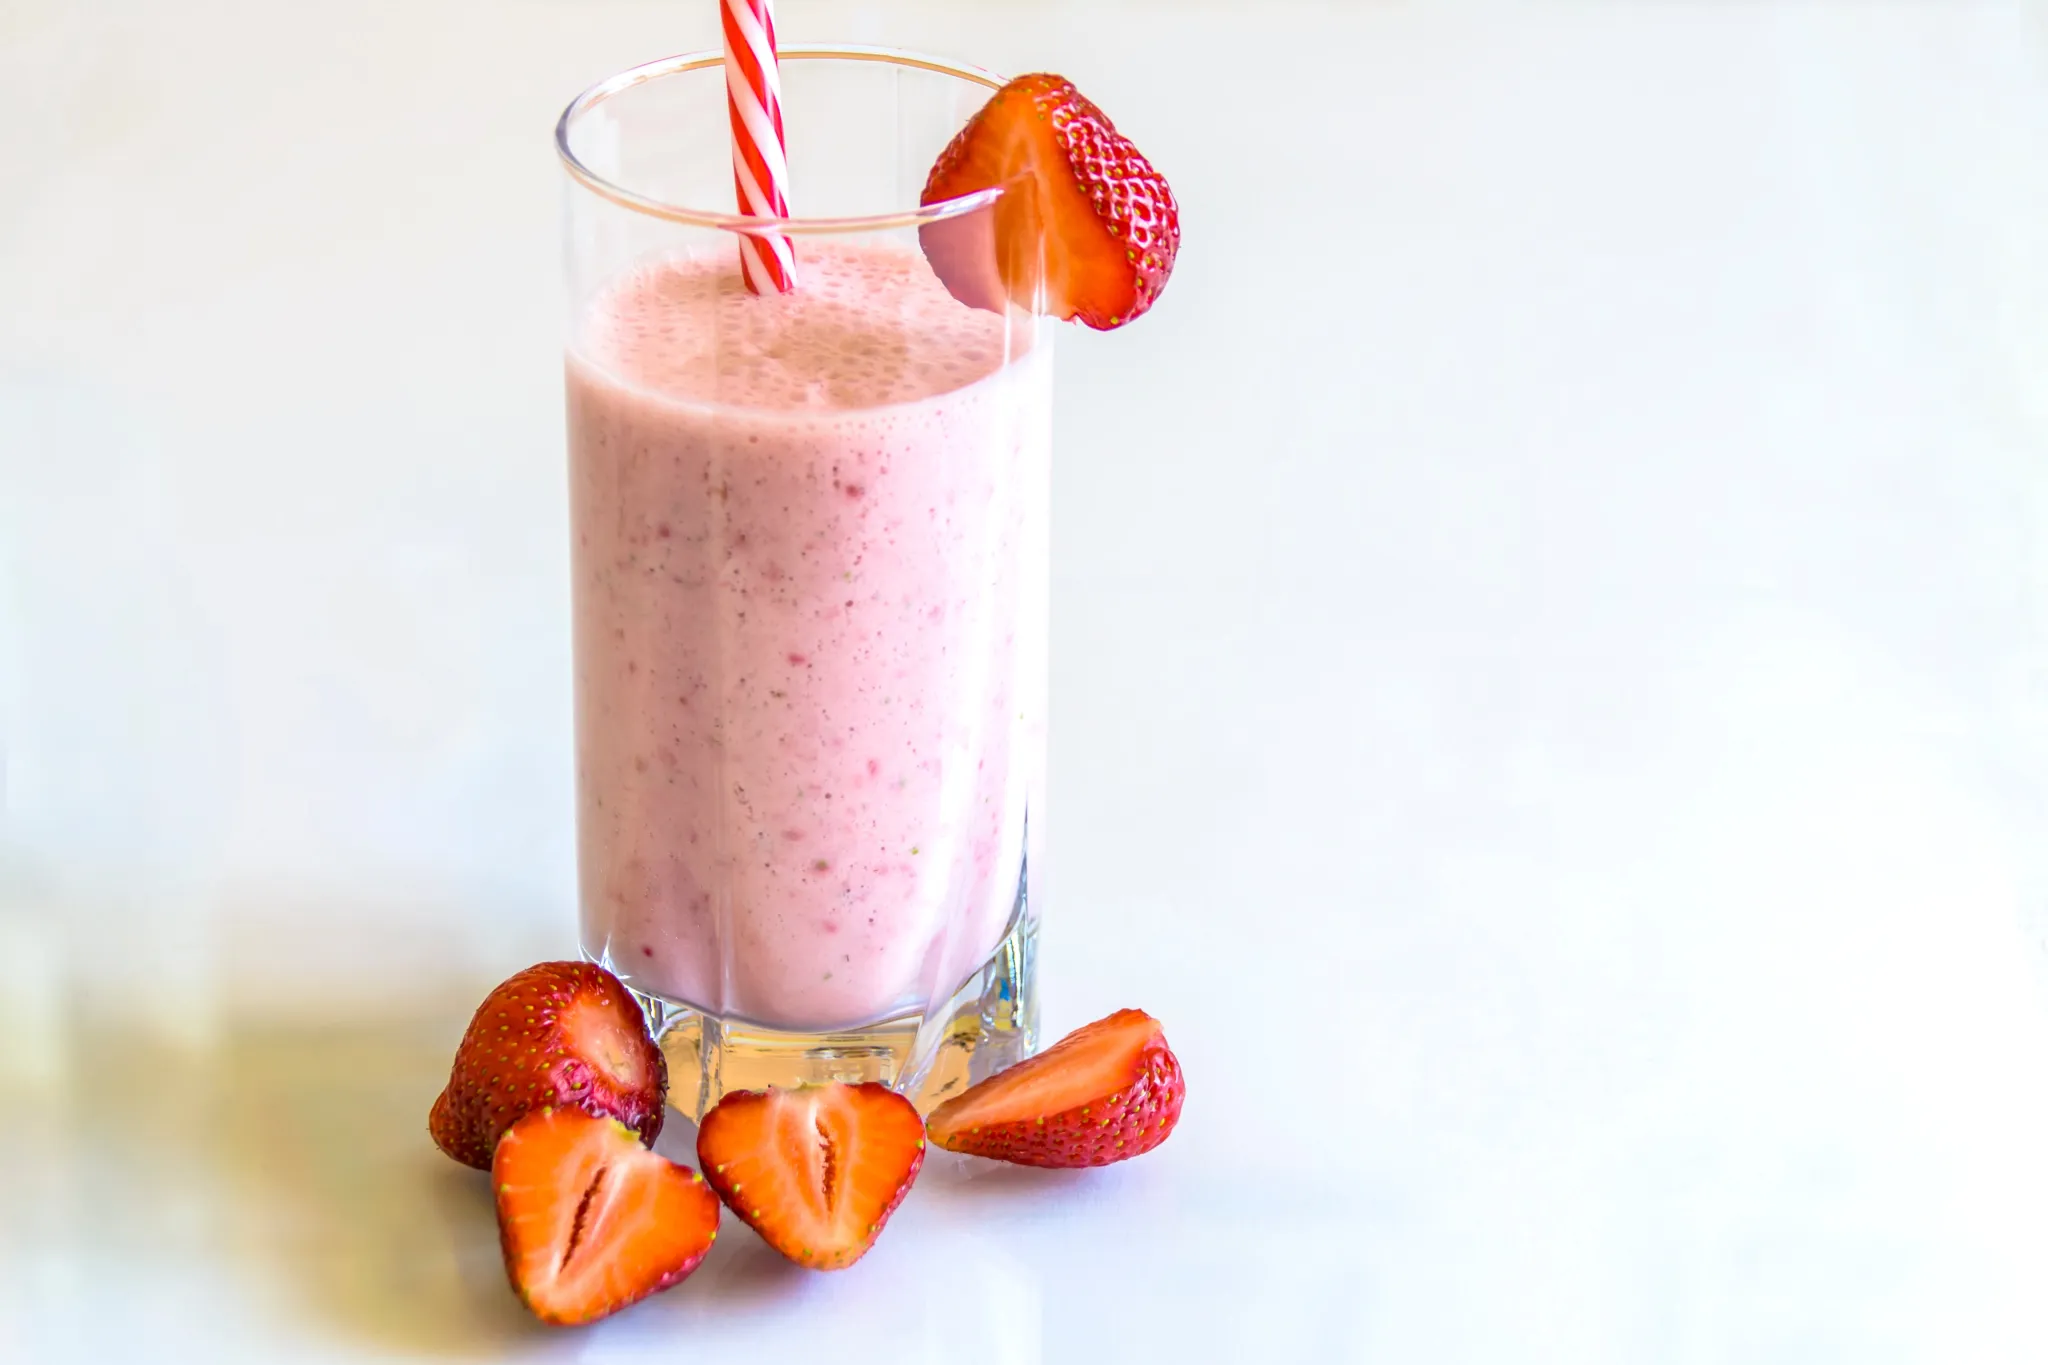 Delicious Strawberry Banana Milkshake Recipe Without Ice Cream – Easy and Healthy